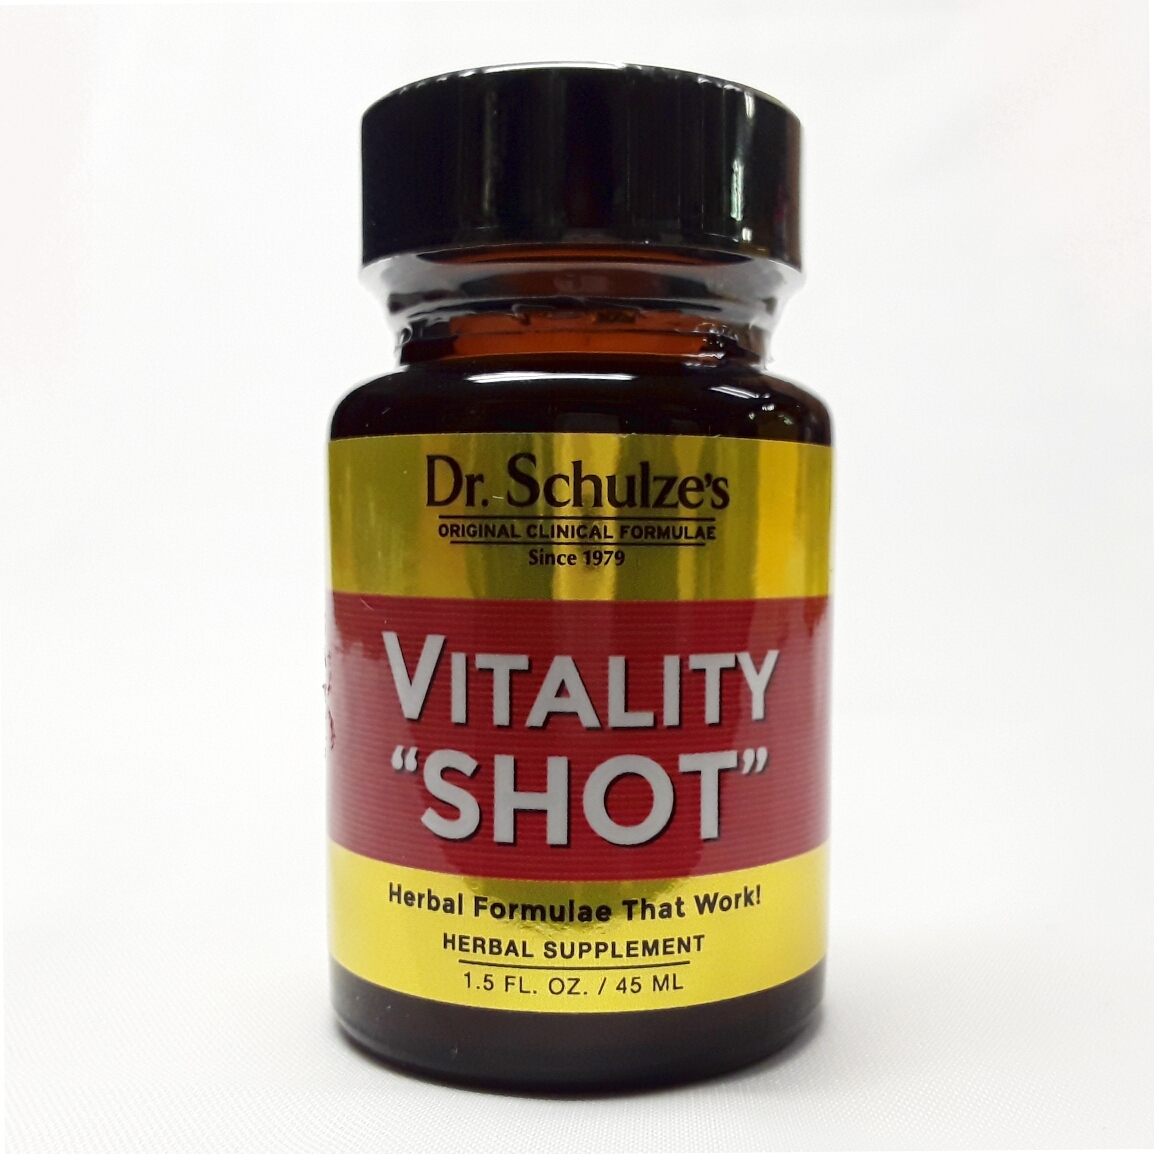 Dr Schulzes Vitality Shot Website Product Image View 1